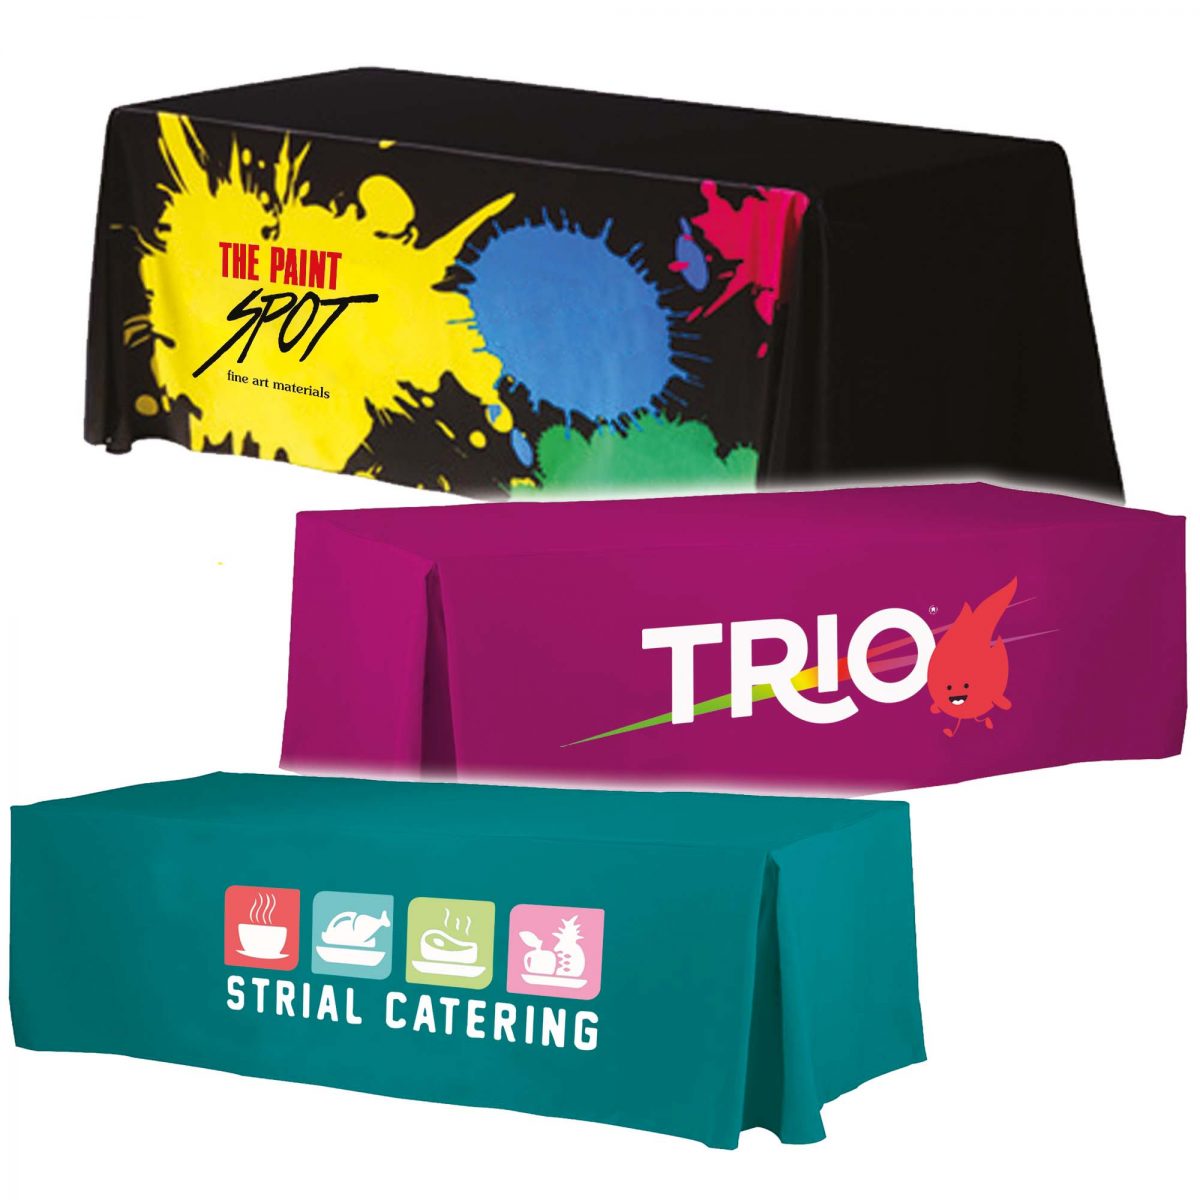 Custom printed table cover designed to enhance brand awareness at events